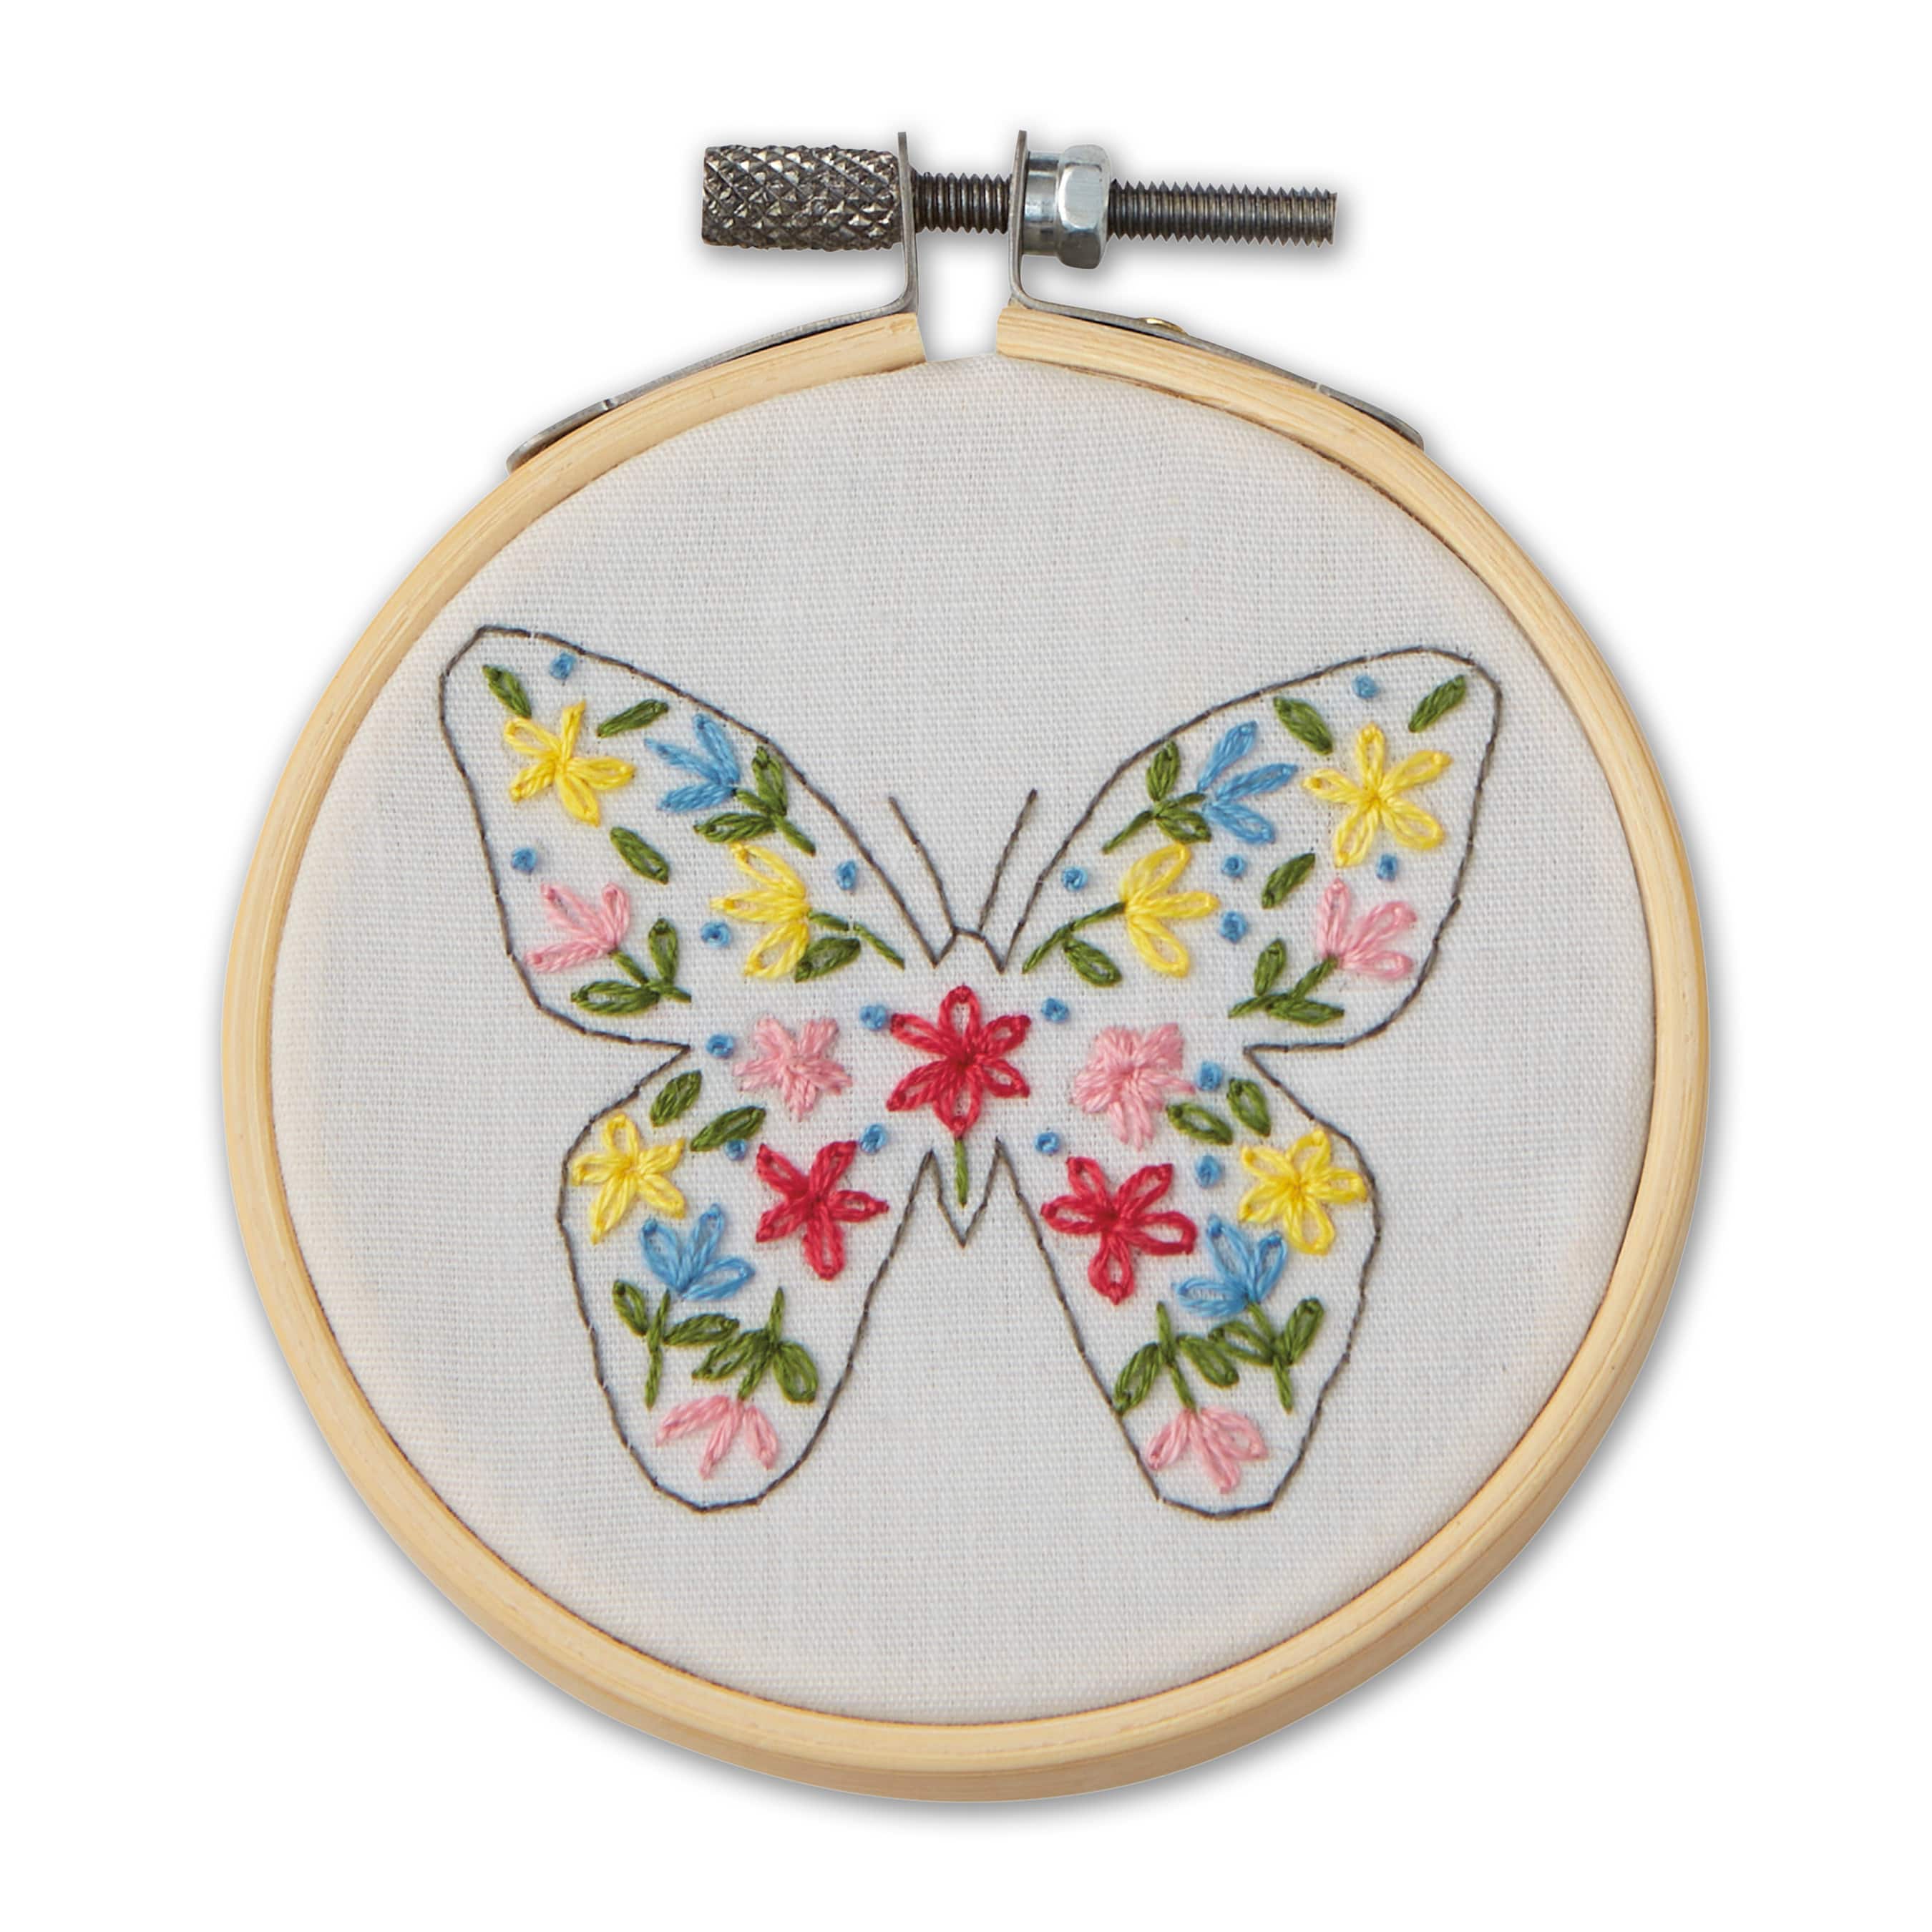 Customized Different Colors Beautiful Iron-on Butterfly Embroidery